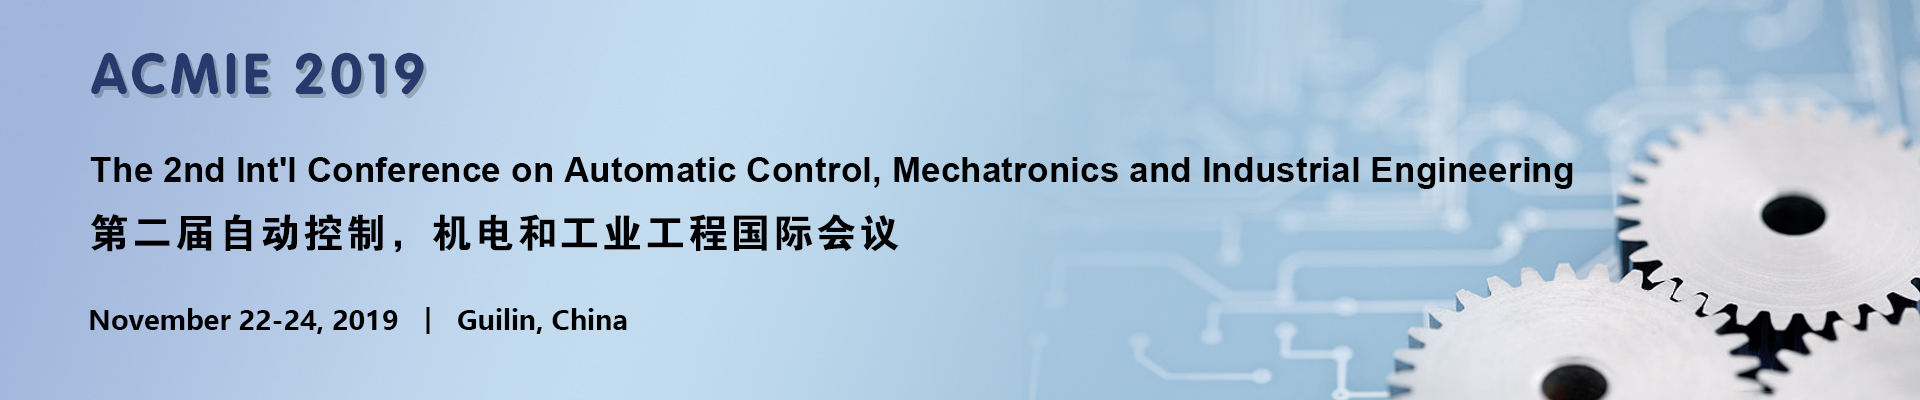 The 2nd Int'l Conference on Automatic Control, Mechatronics and Industrial Engineering (ACMIE 2019)